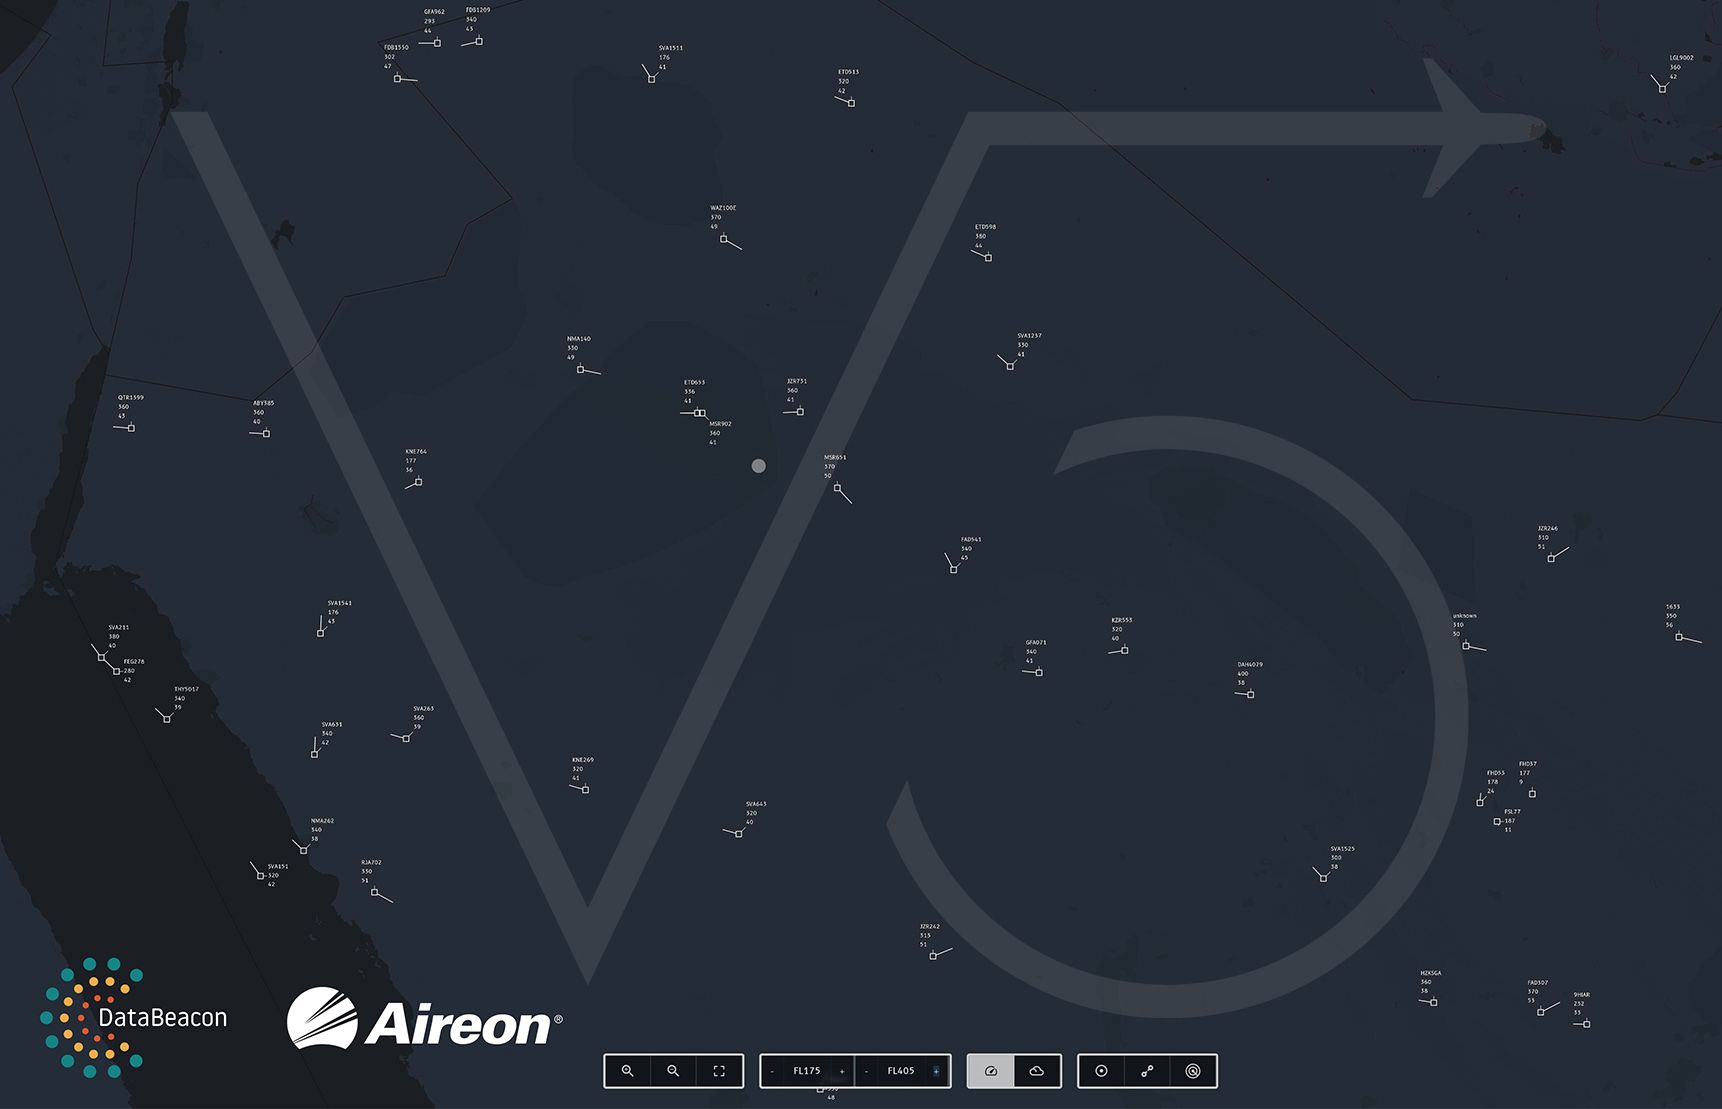 https://datascience.aero/victor5-powered-aireon-airspace-world/